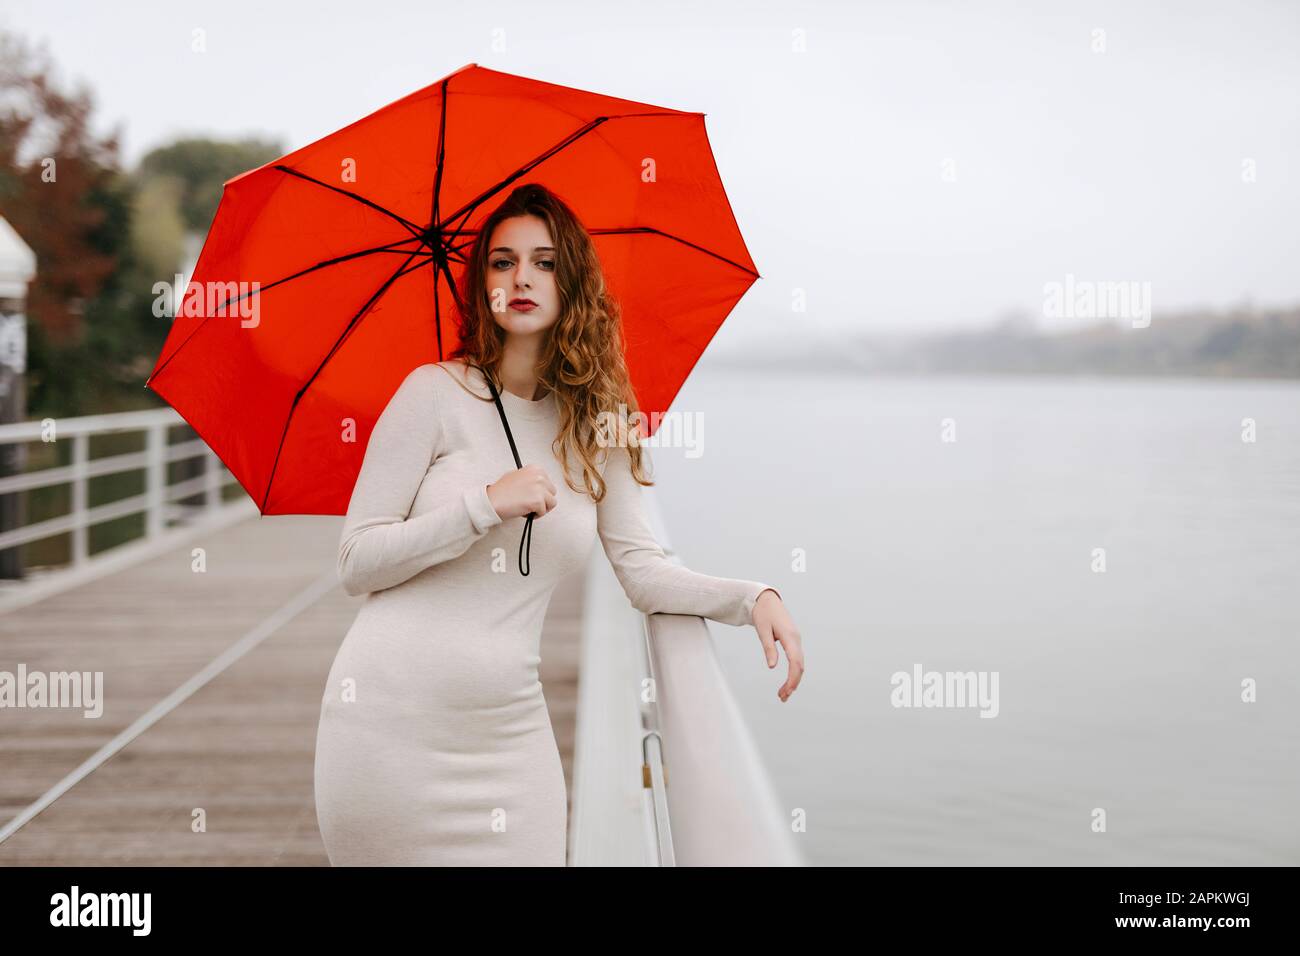 Portrait of young woman with red umbrella, leaning on railing during rainy day Stock Photo